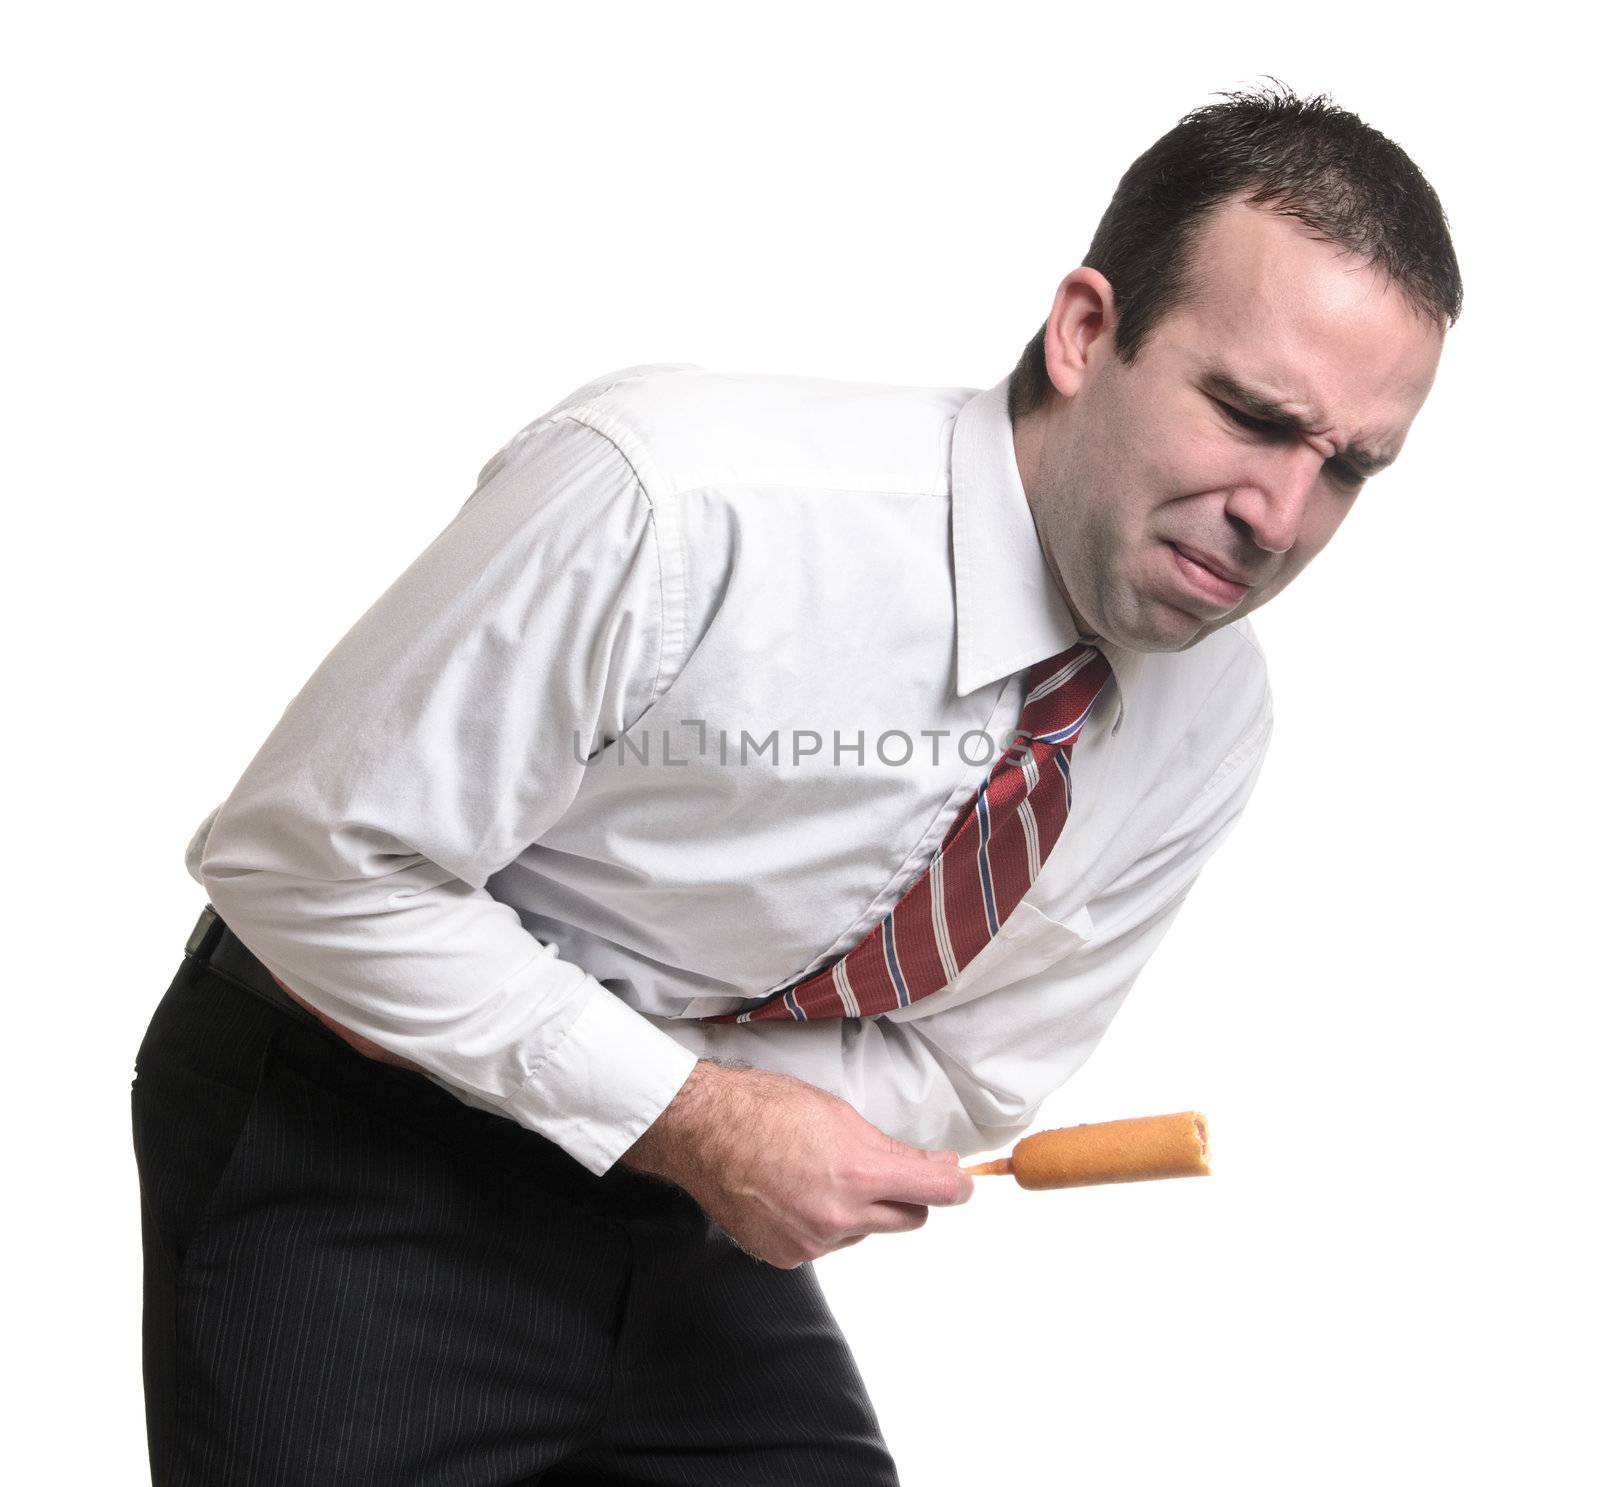 A young man suffering from a stomach ache due to eating a bad corn dog. Isolated against a white background.